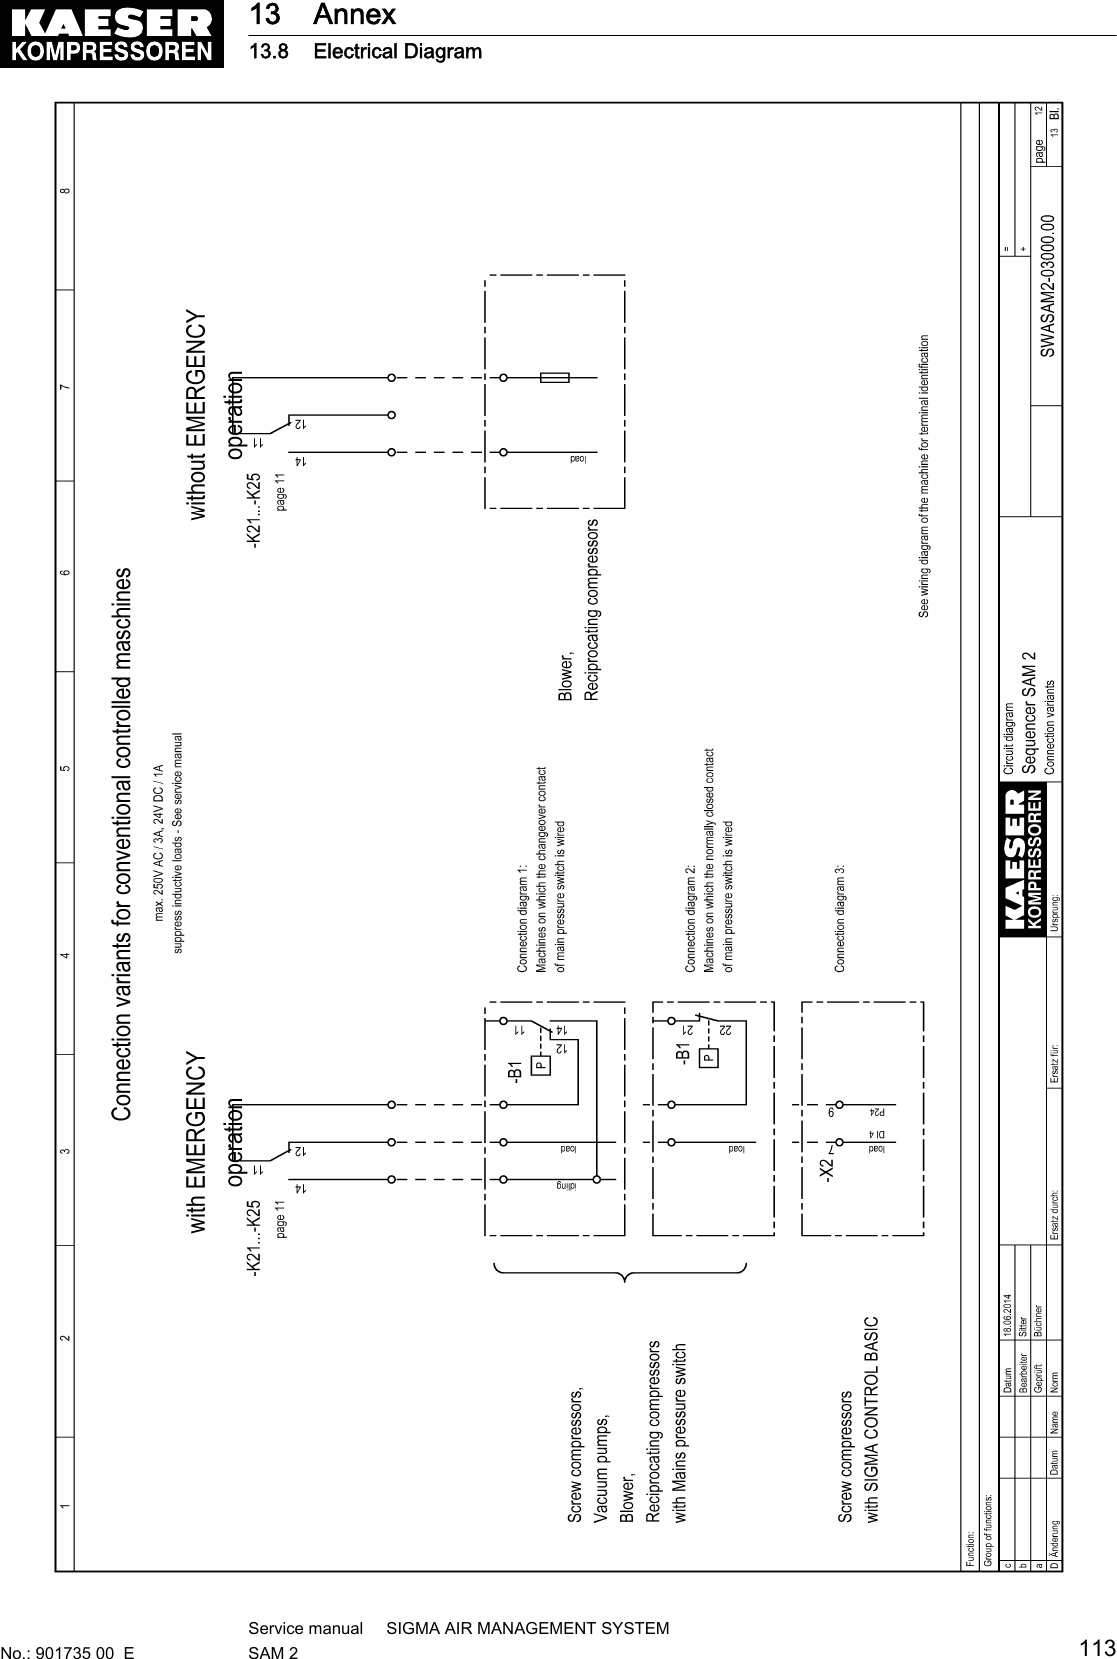 13 Annex13.8 Electrical DiagramNo.: 901735 00  EService manual     SIGMA AIR MANAGEMENT SYSTEMSAM 2  113